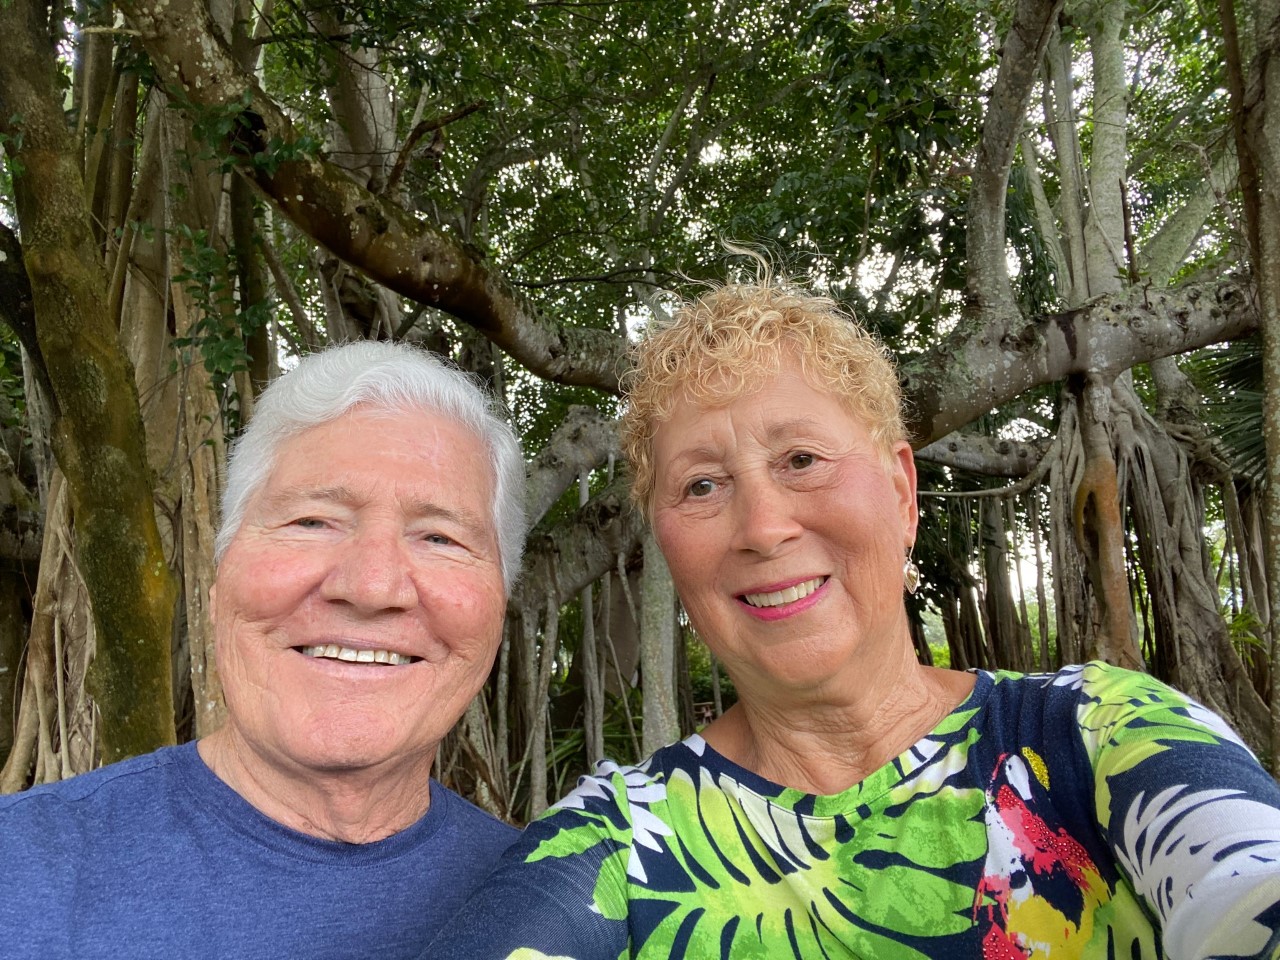 Our selfie at the banyan tree at The Ringling.